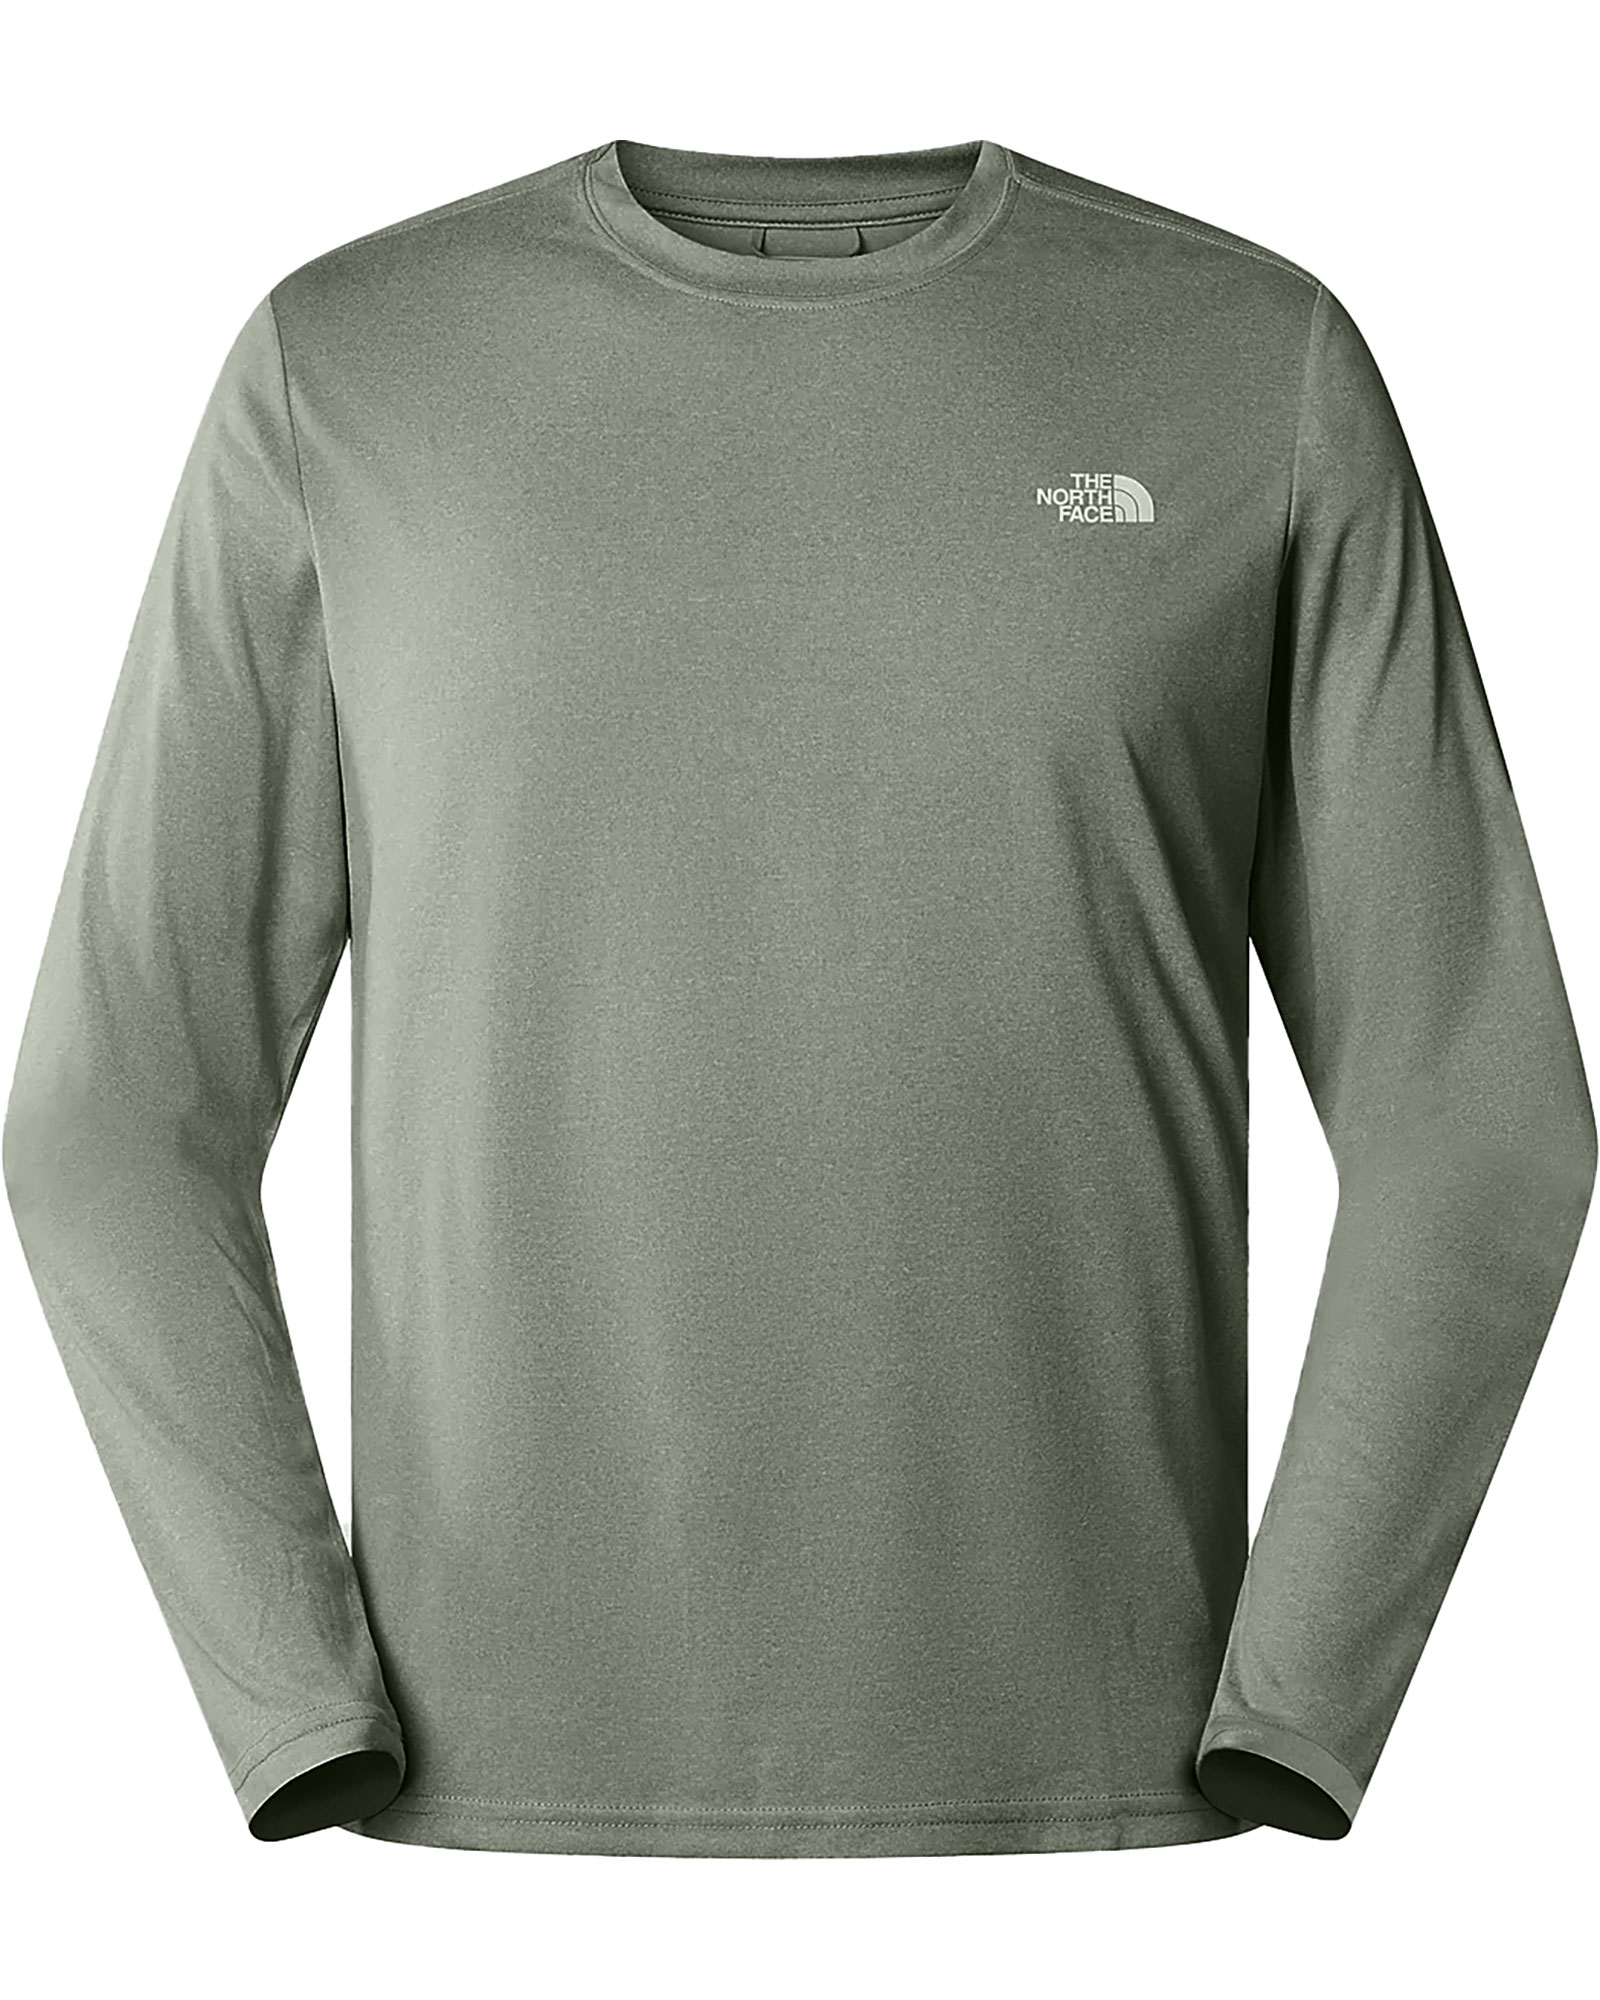 The North Face Men’s Reaxion Amp Long Sleeved Crew T Shirt - New Taupe Green Heather XL